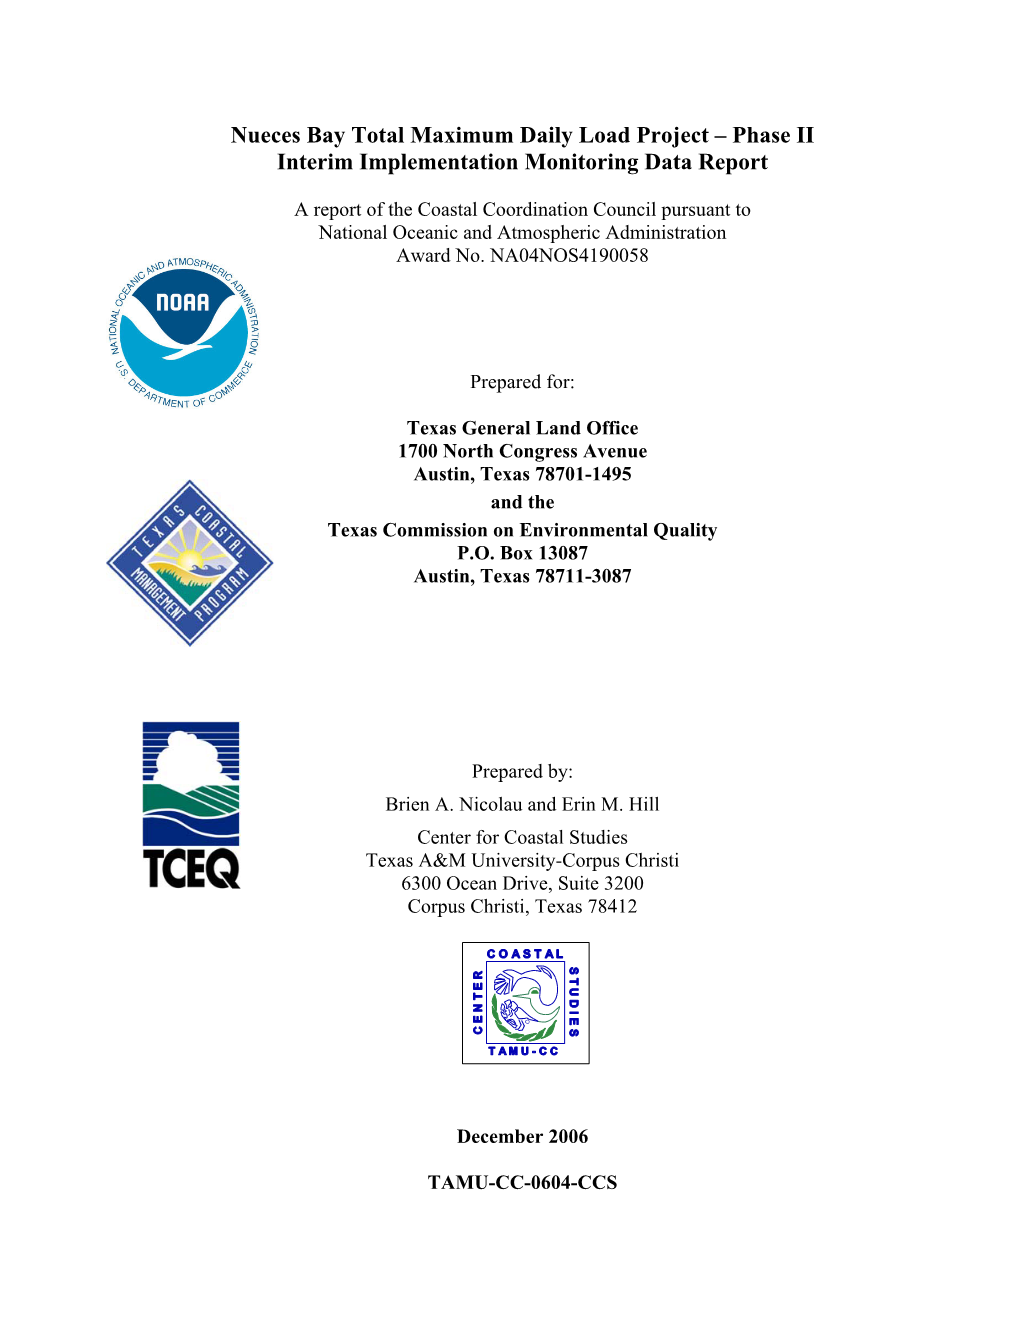 Nueces Bay Total Maximum Daily Load Project – Phase II Interim Implementation Monitoring Data Report